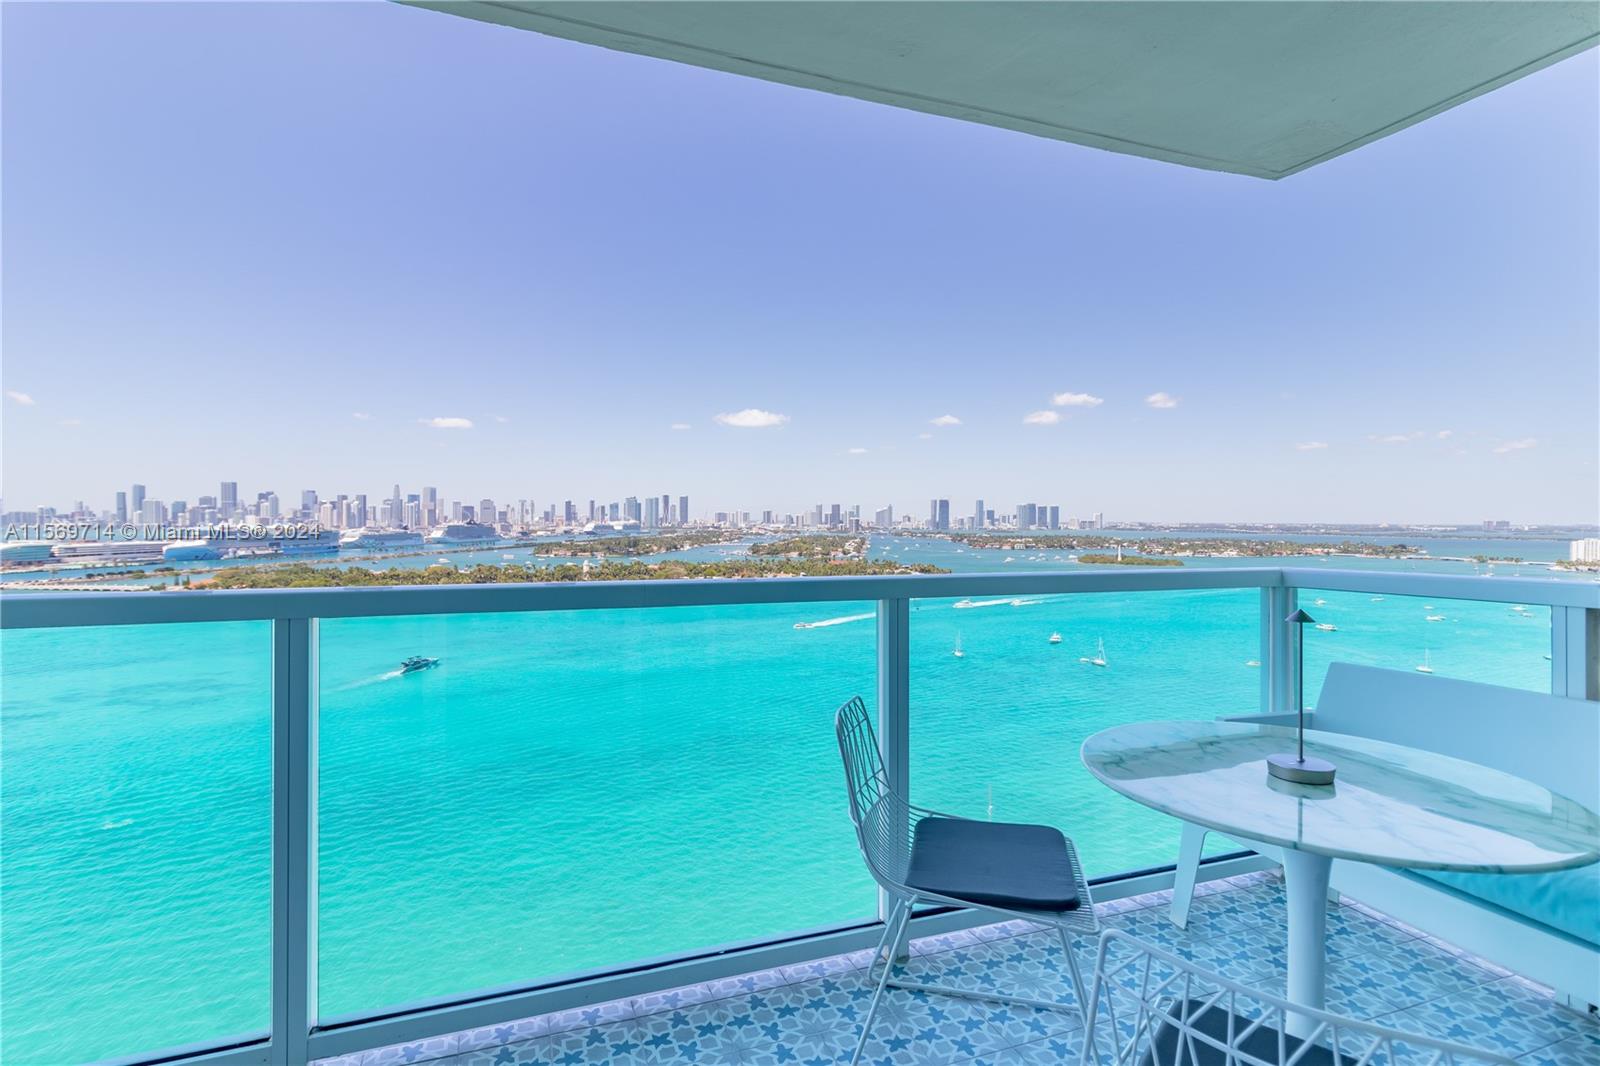 Incredible views from this high floor direct bayfront residence at The Floridian! Completely move in ready with brand new kitchen and bath, marble flooring throughout, spacious tiled balcony with endless views of Biscayne Bay, Port Miami and the majestic Miami skyline. Incredible location adjacent to the new Canopy Park and a short walk to South Pointe, Lincoln Road, the beach,dining/shopping plus easy access to the causeway to all highways just a block away. Unobstructed Direct bay views and incredible sunsets! The Floridian is a full service luxury condo with two bayfront pools, tennis, poolside food/beverage, business center, gym, spa and onsite market. Very well managed with 24 hour attended lobby, security & valet. Wifi/highspeed internet included. Pets welcome, furniture negotiable